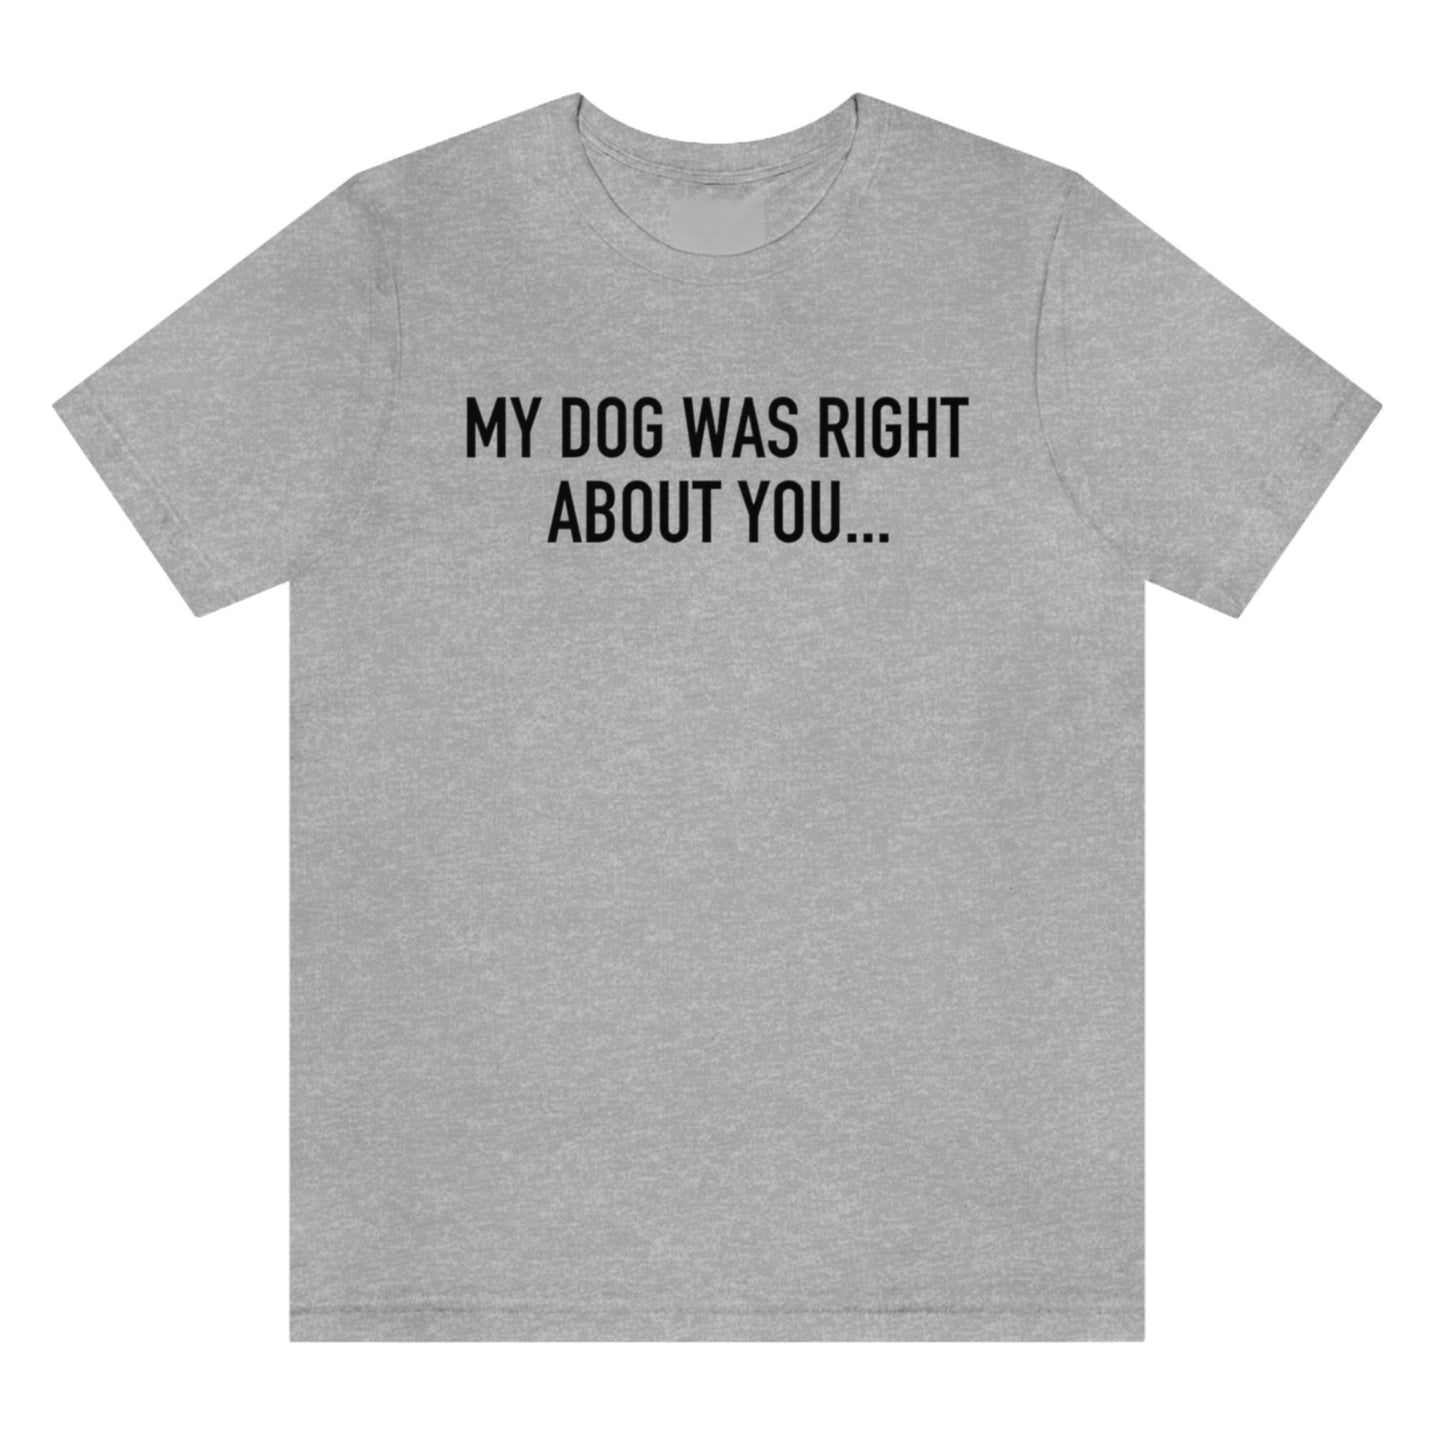 my-dog-was-right-about-you-athletic-heather-grey-t-shirt